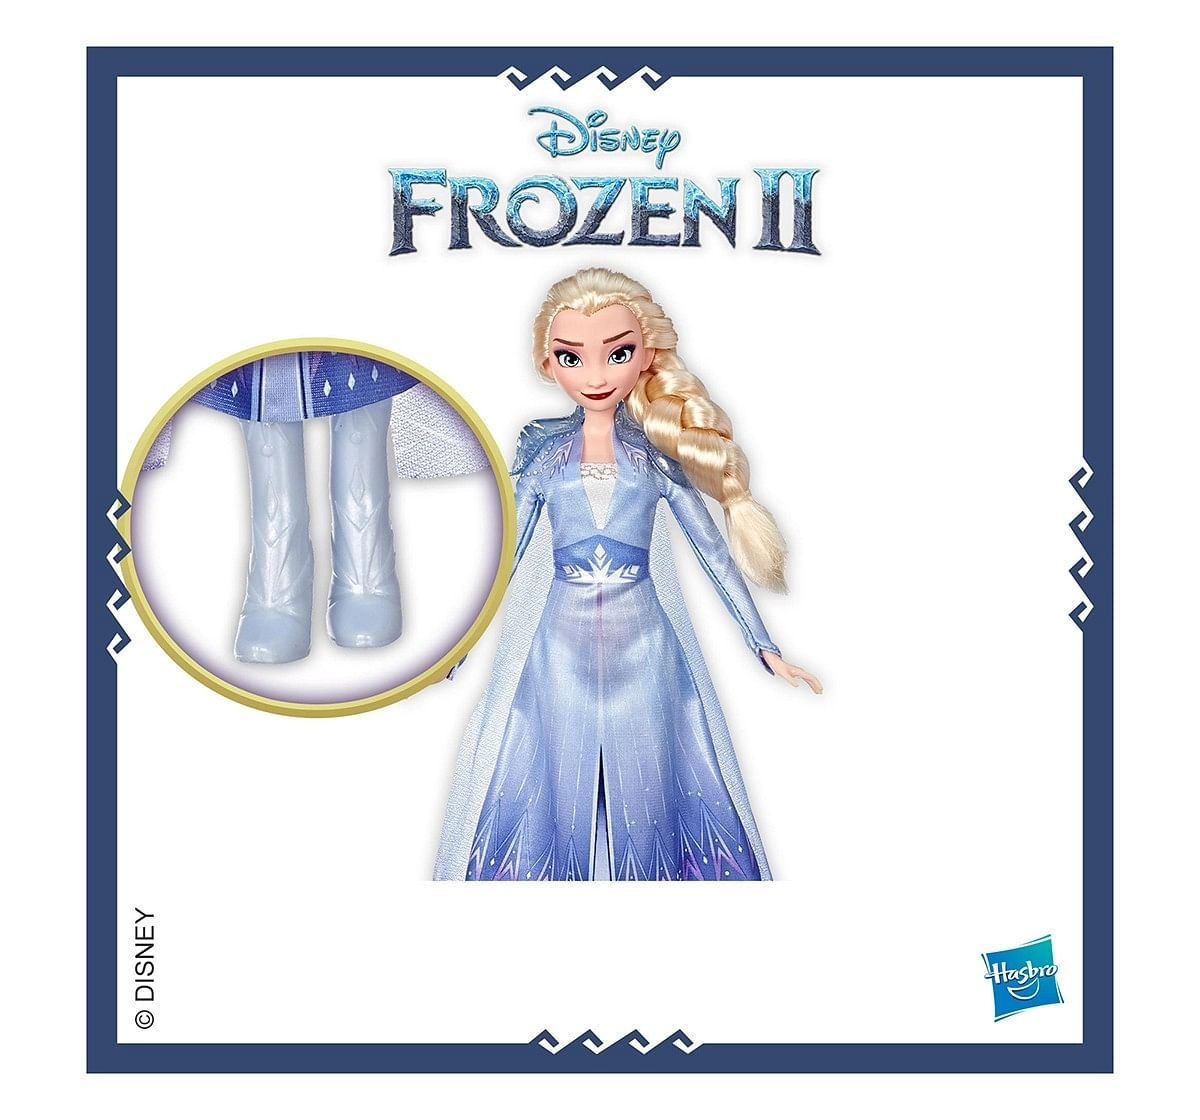 Disney Frozen 2 Elsa Fashion Doll With Long Blonde Hair And Blue Outfit Inspired By Frozen 2  Dolls & Accessories for age 3Y+ 